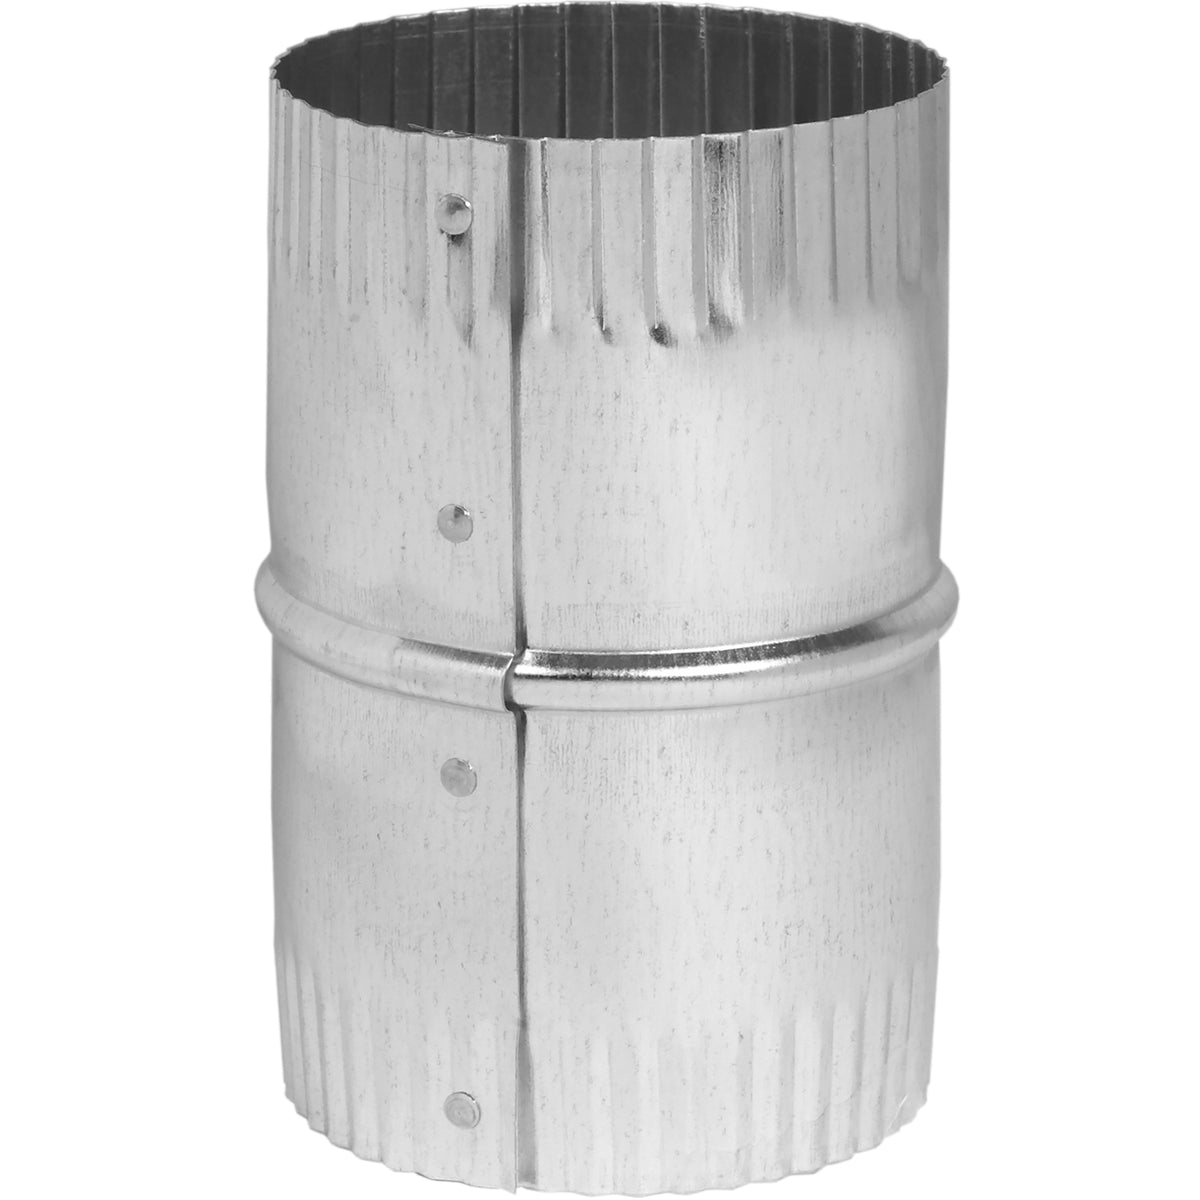 Imperial GV1071 Galvanized Round Duct Connector Union, 6"